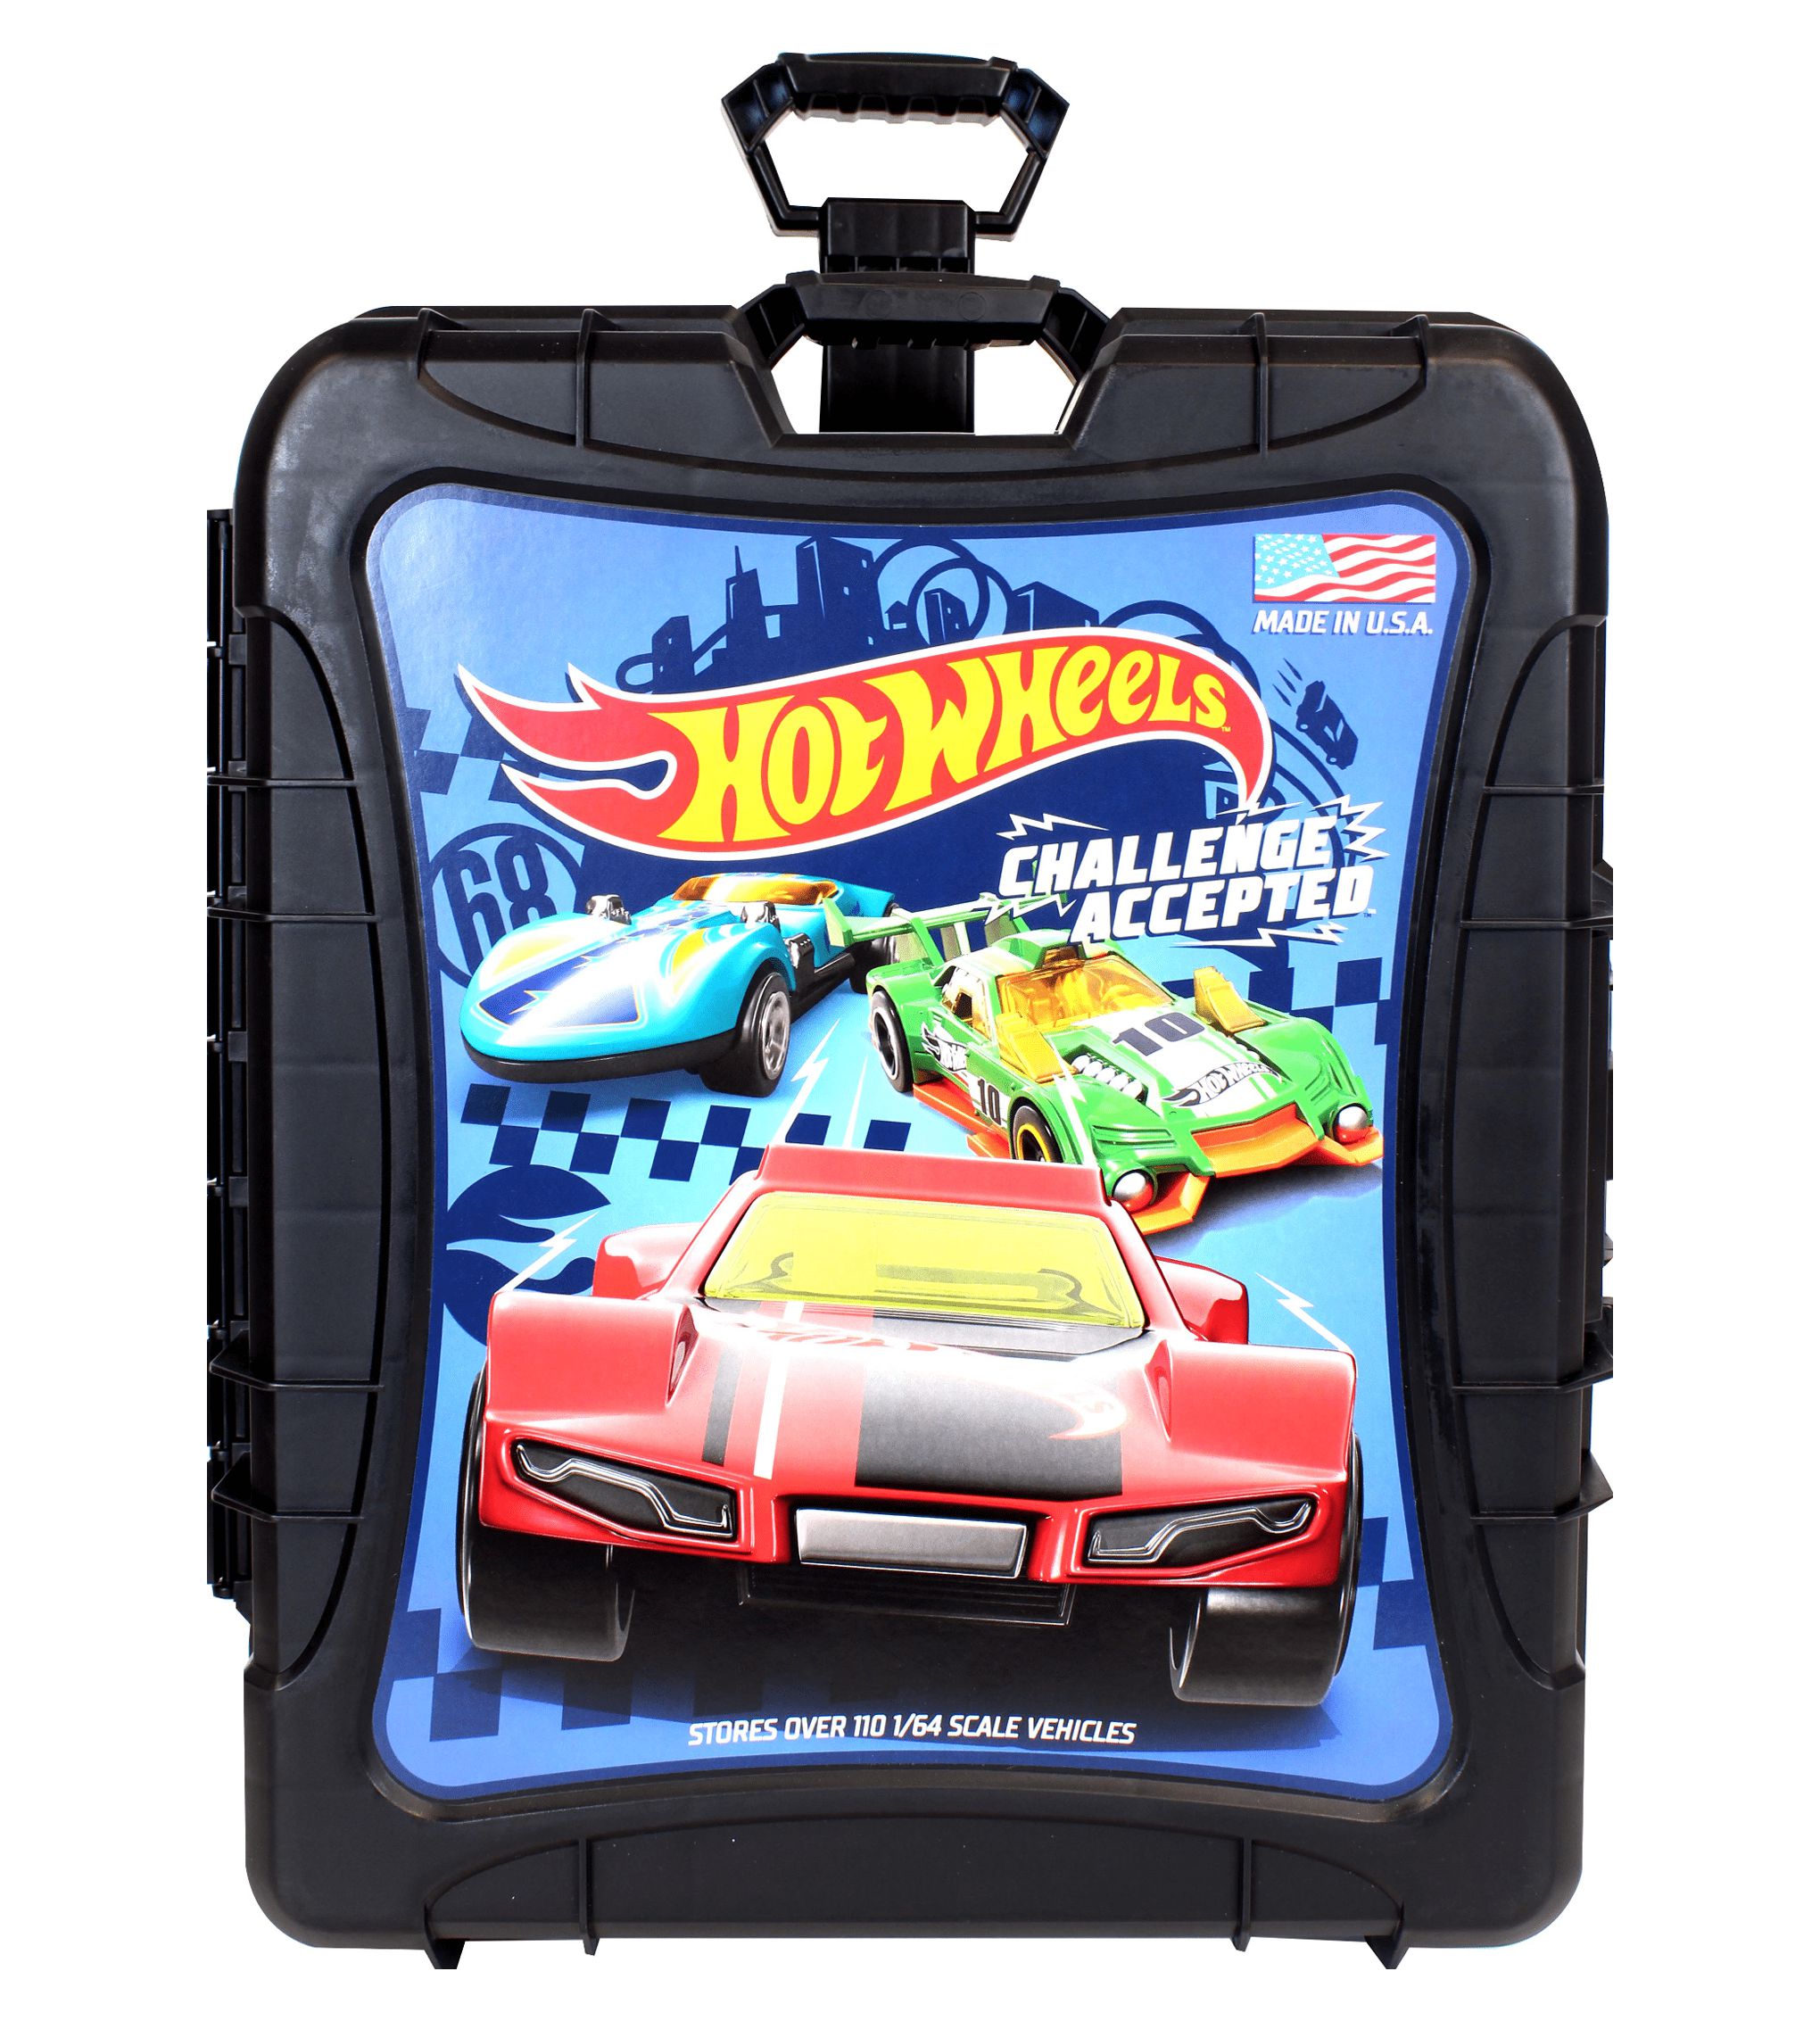 Hot Wheels 110 Vehicle Playsets Plastic Carrying Case in Black, for Child Ages 3+ - image 2 of 5